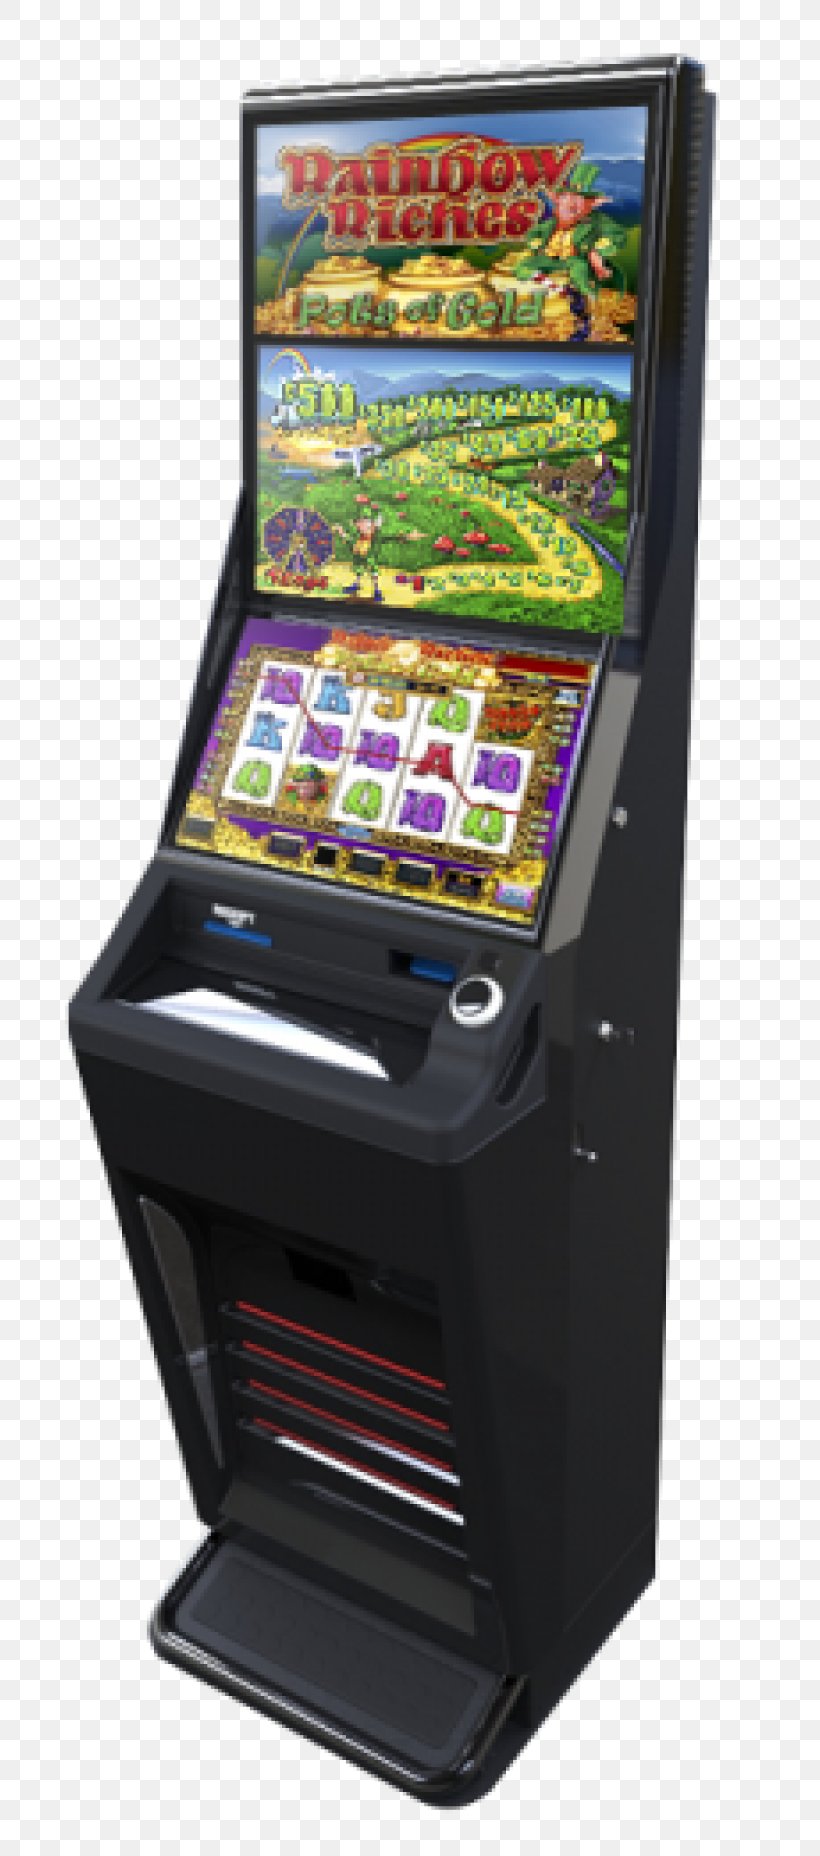 Fixed Odds Betting Terminal Roulette Gambling Sports Betting Fixed-odds Betting, PNG, 768x1856px, Fixed Odds Betting Terminal, Betting Shop, Electronic Device, Fixedodds Betting, Gadget Download Free